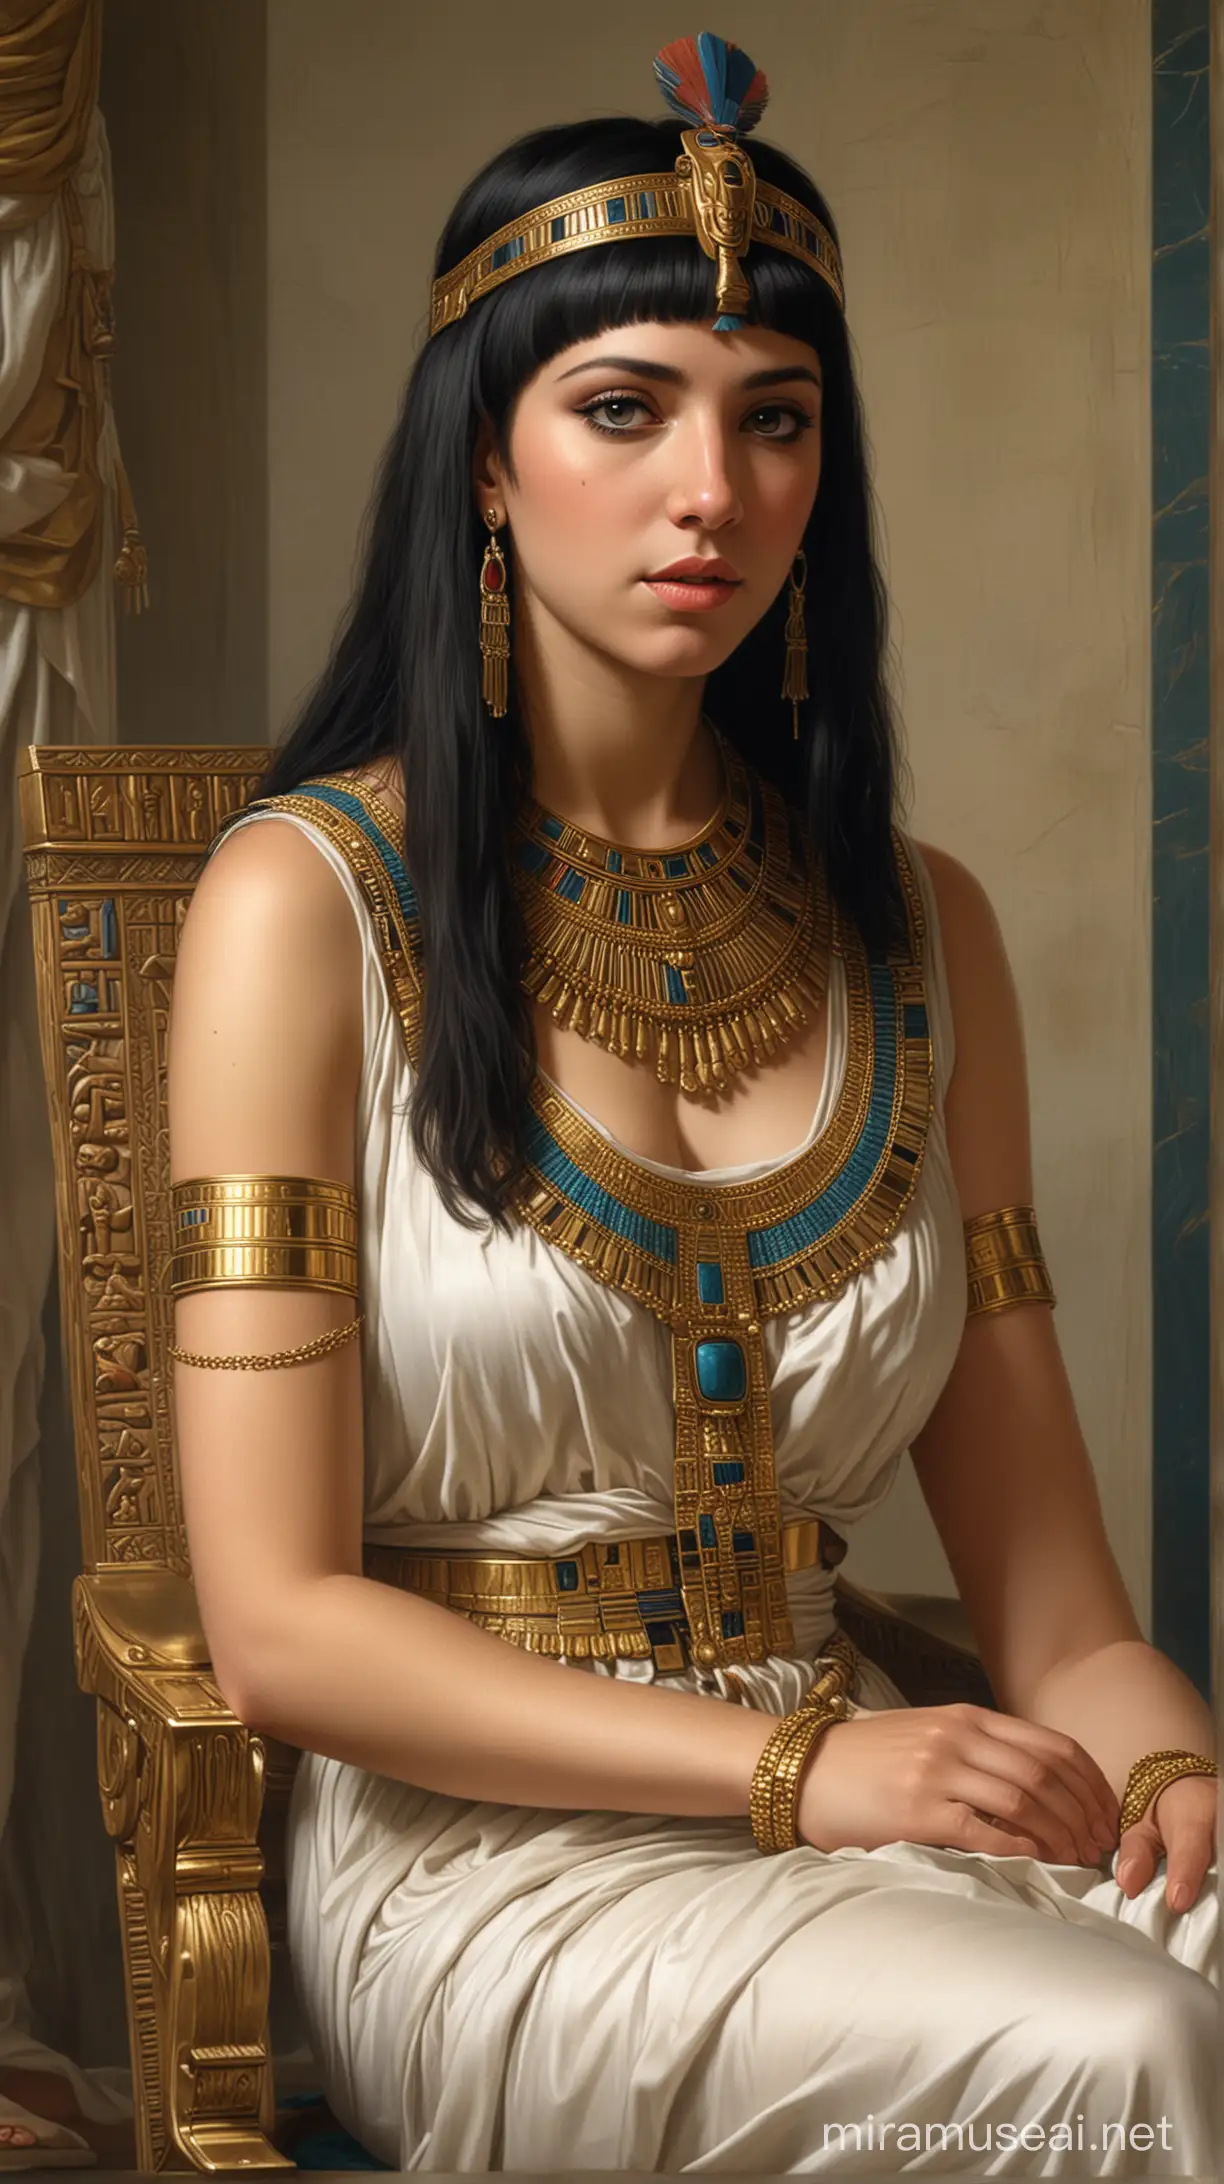 Cleopatra depicted as a young queen, inheriting the throne from her father, symbolizing the beginning of her reign.hyperrealistic